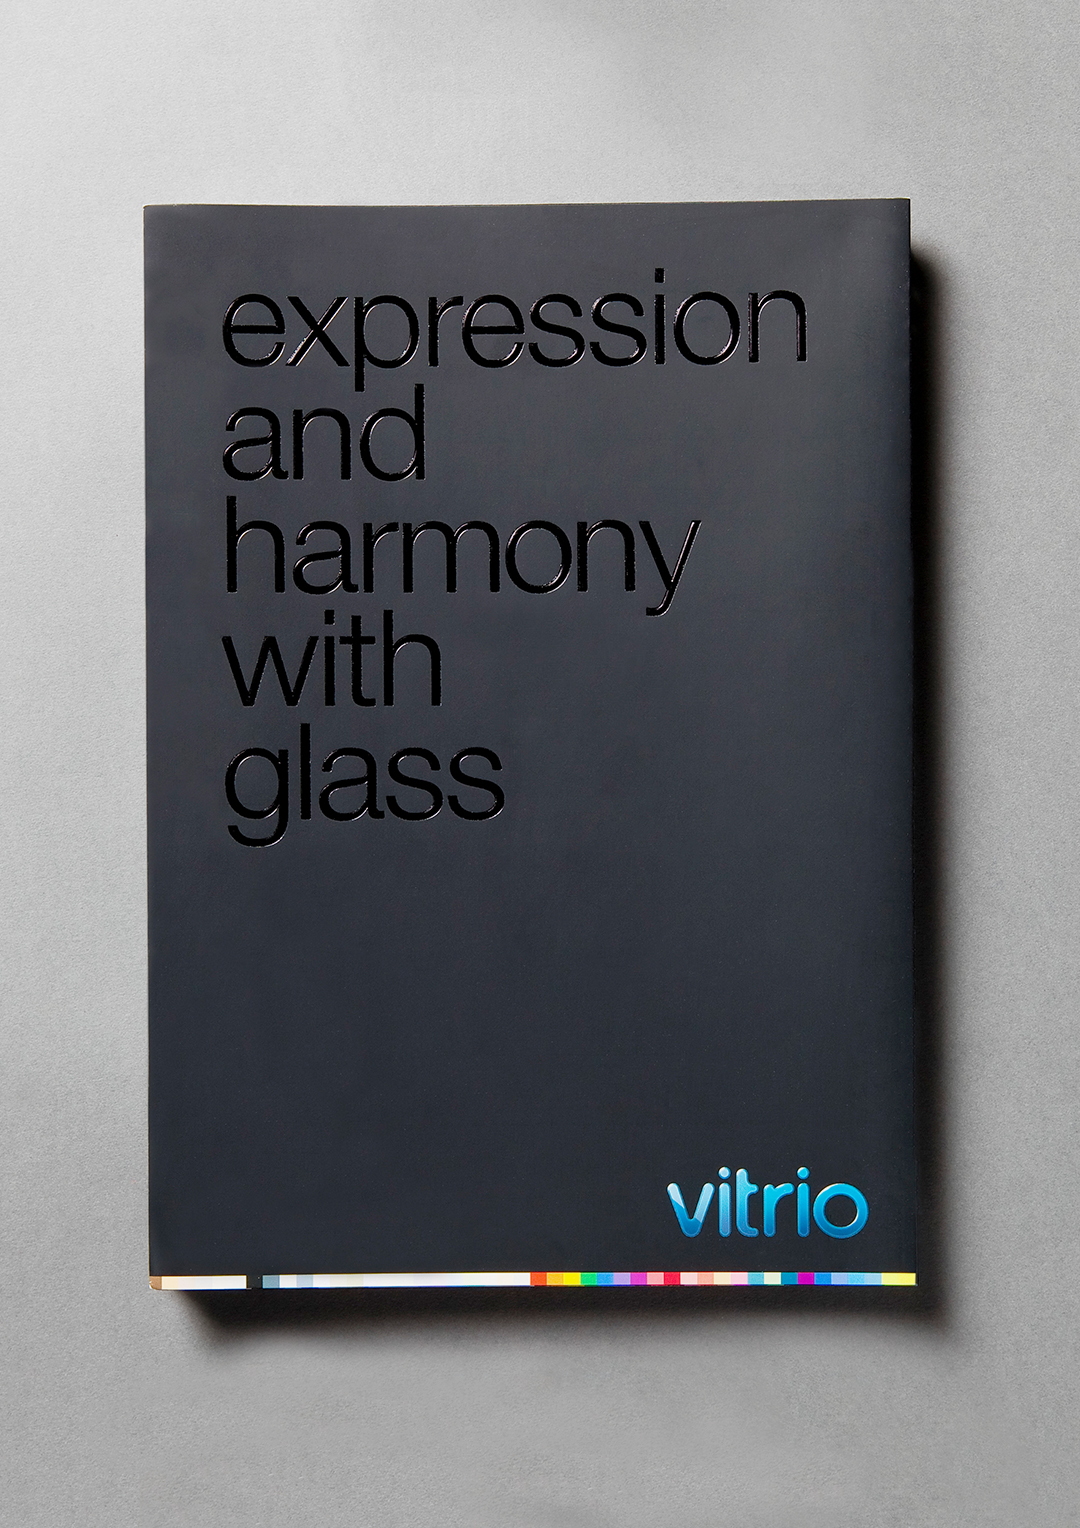 Saint Gobain Glass Solutions. Vitrio Glass Swatch Packaging. Creative artwork and graphic design.